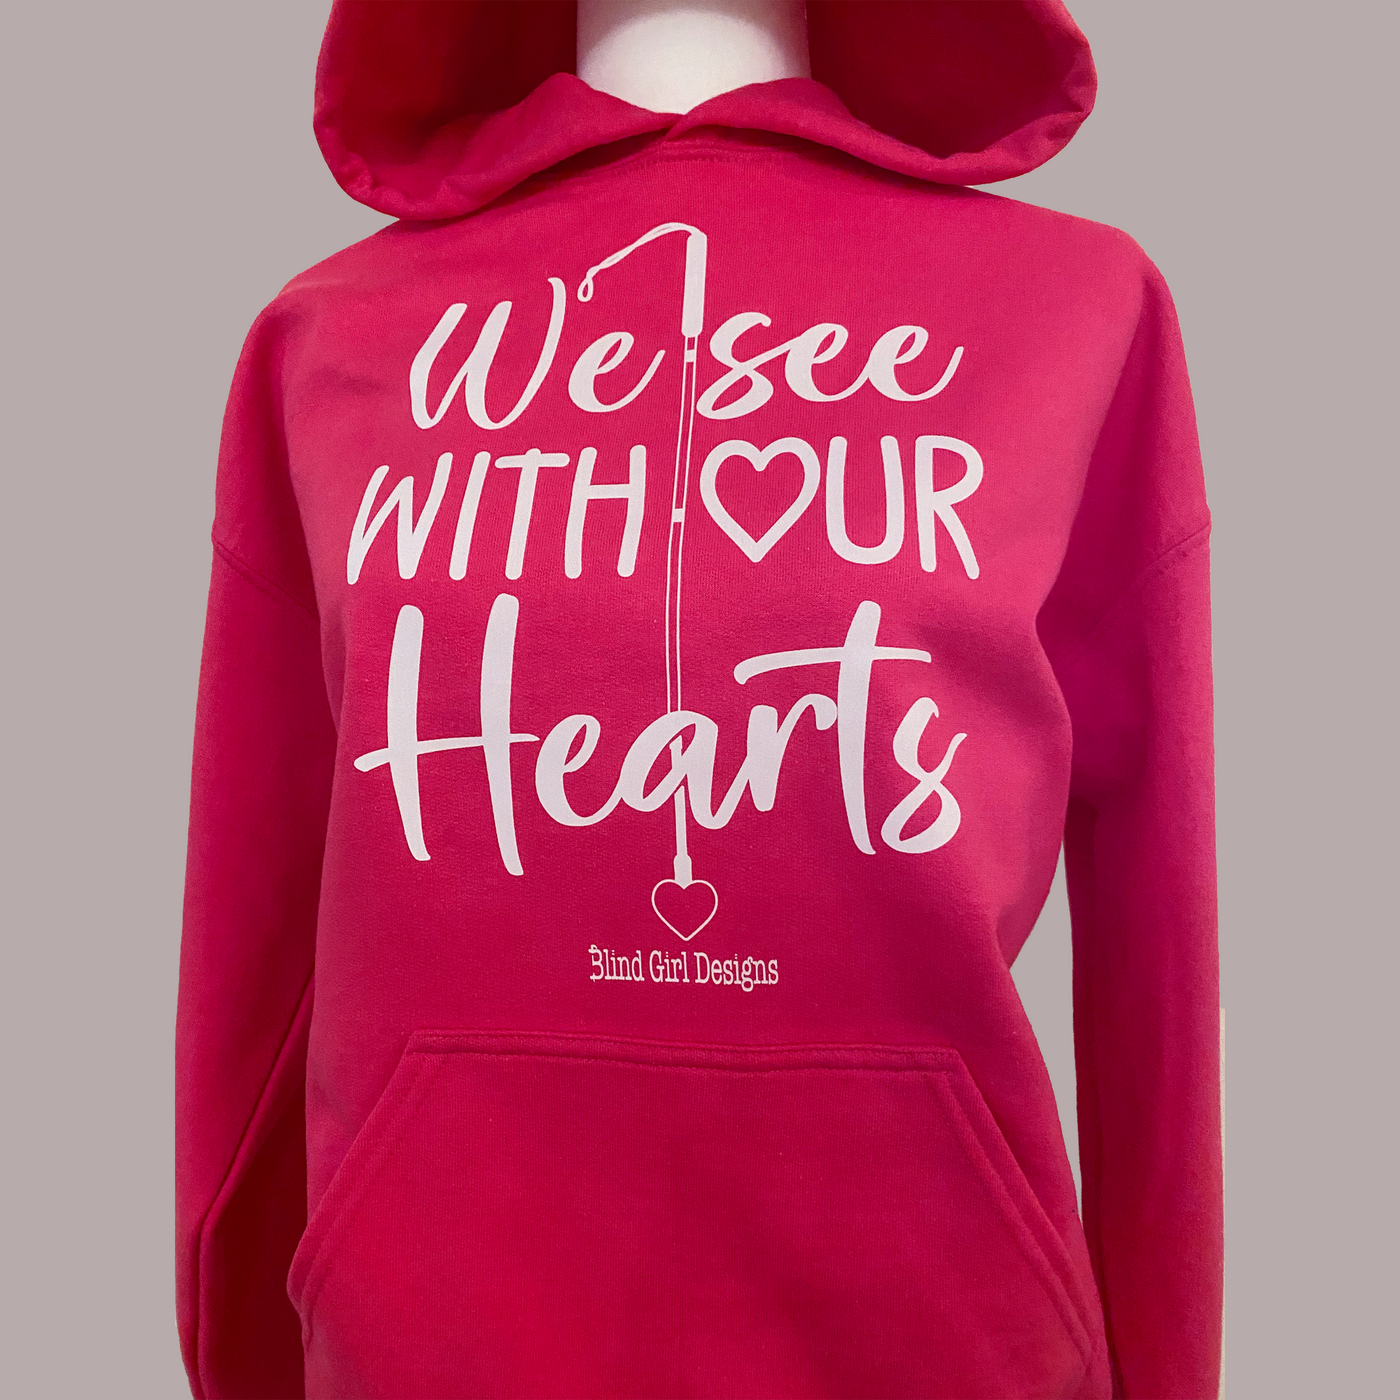 NEW 3D! We See With Our Hearts Hoodie - Bright Pink